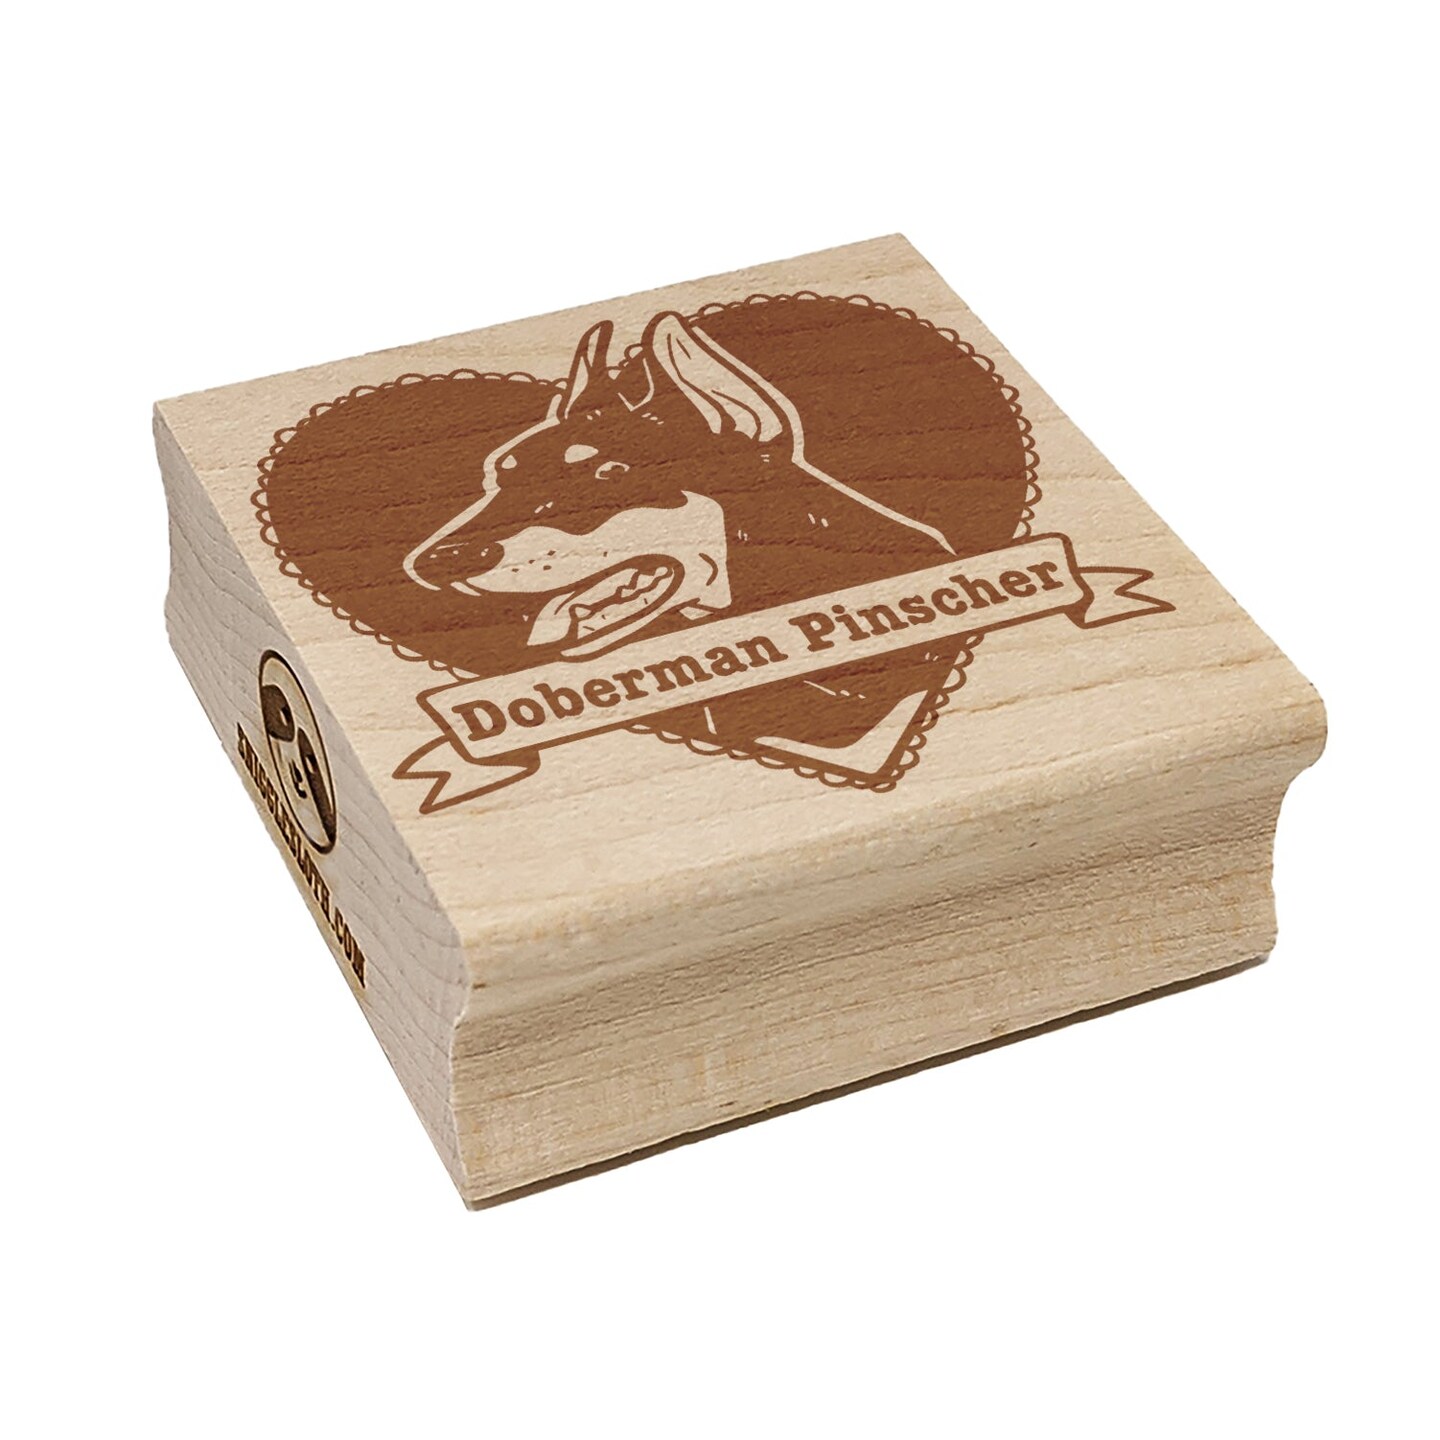 Doberman Pinscher Dog Heart Square Rubber Stamp for Stamping Crafting